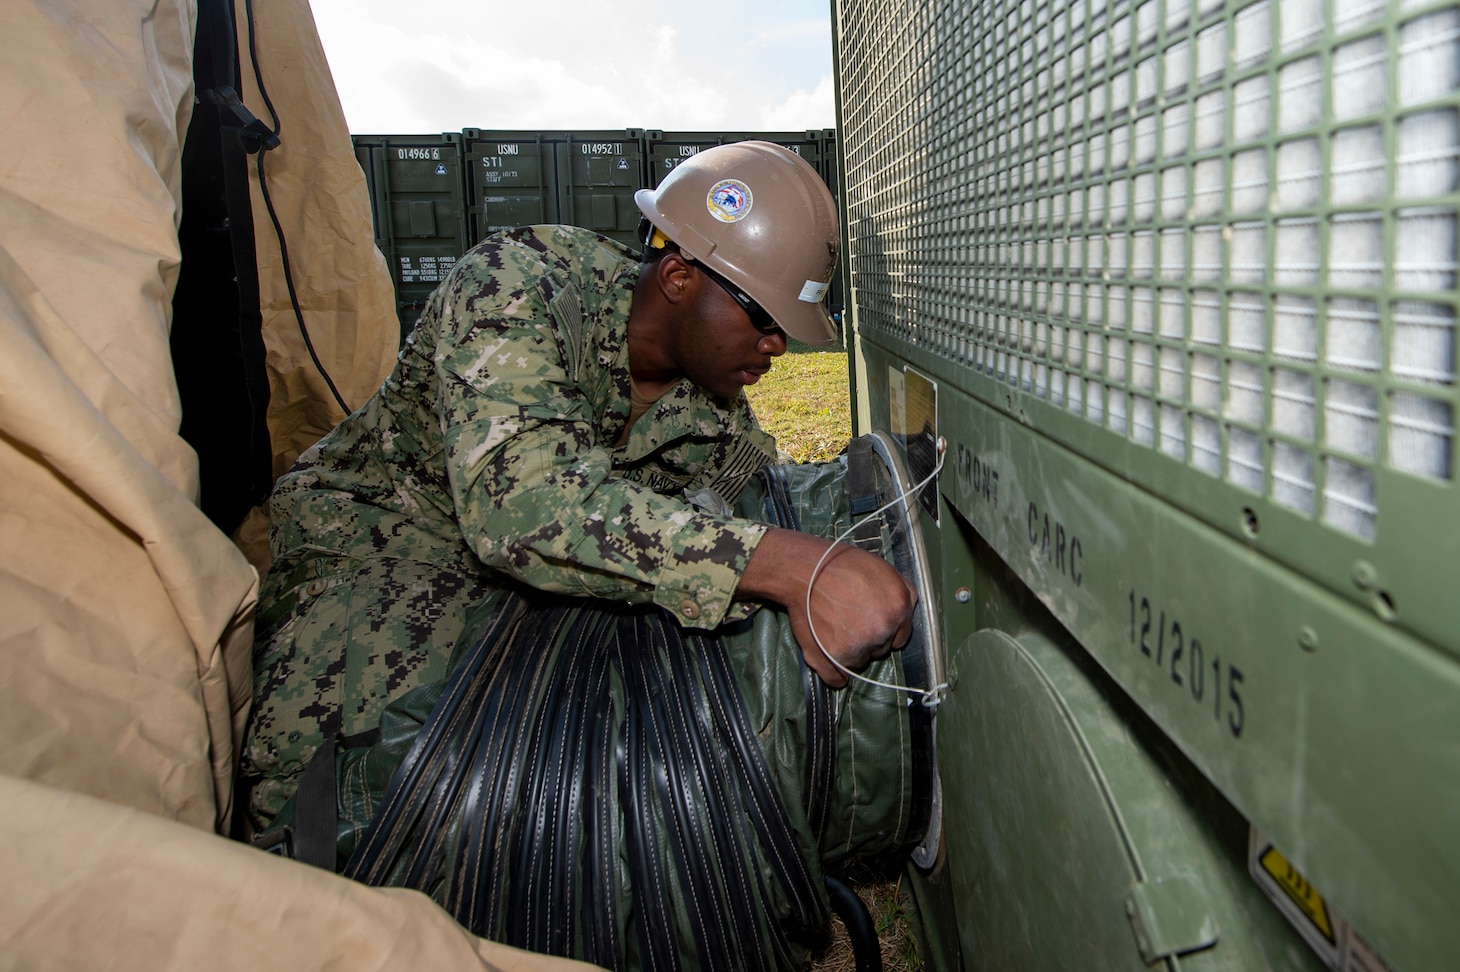 OKINAWA, Japan (Dec. 16, 2019) Builder 2nd Class Javaughn Reid, deployed with Naval Mobile Construction Battalion (NMCB) 5, sets up air conditioning in one of the communication tents during a joint Communication Exercise (COMMEX) and 48-hour Mount-Out Exercise (MOX) on board Camp Shields, Okinawa. Combining COMMEX and MOX demonstrates the battalion’s ability to rapidly deploy and operate in a tactical environment. NMCB-5 is deployed across the Indo-Pacific region conducting high-quality construction to support U.S. and partner nations to strengthen partnerships, deter aggression, and enable expeditionary logistics and naval power projection.